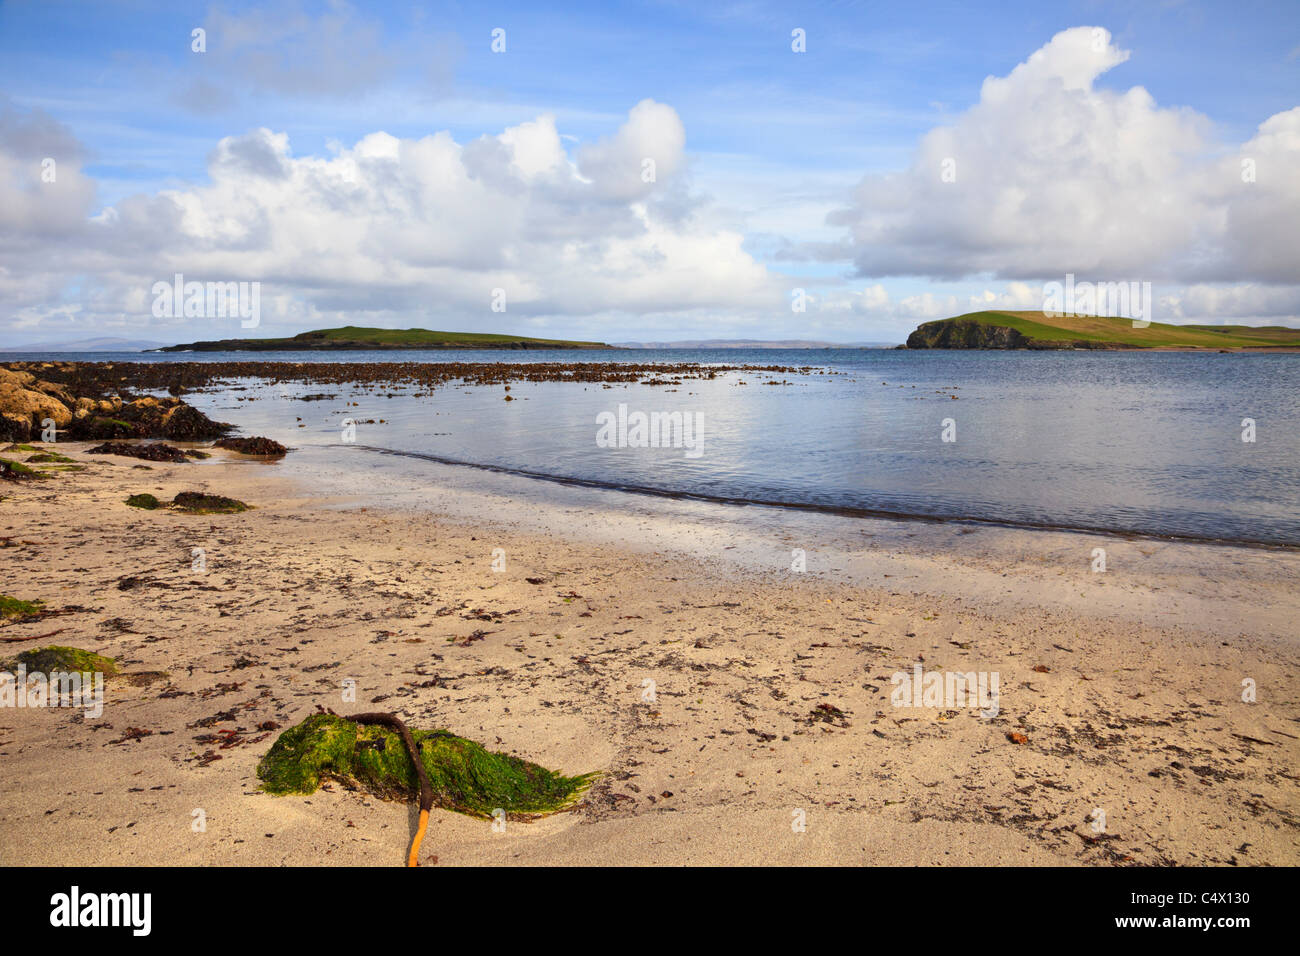 Ness of Melby, Sandness, Shetland Islands, Scotland, UK. Empty sandy beach and view across the bay to Melby Holm island Stock Photo